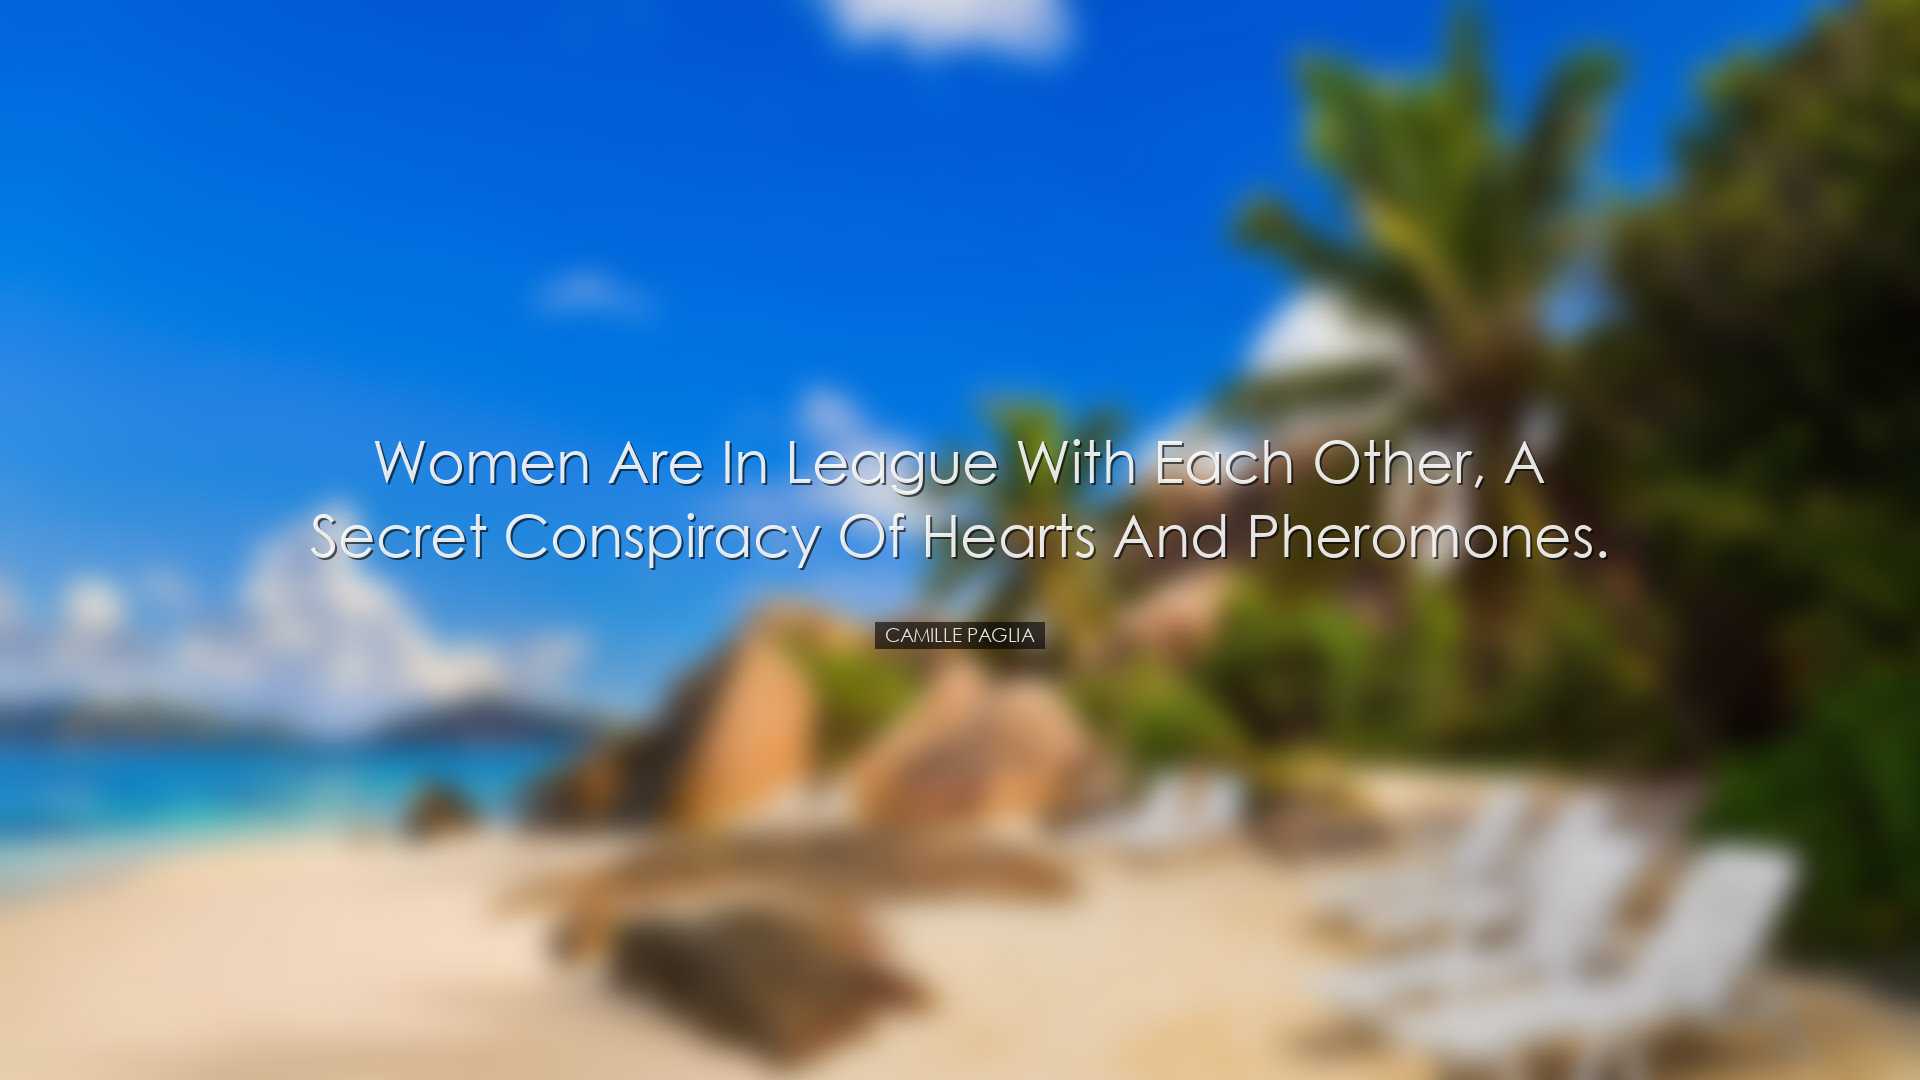 Women are in league with each other, a secret conspiracy of hearts